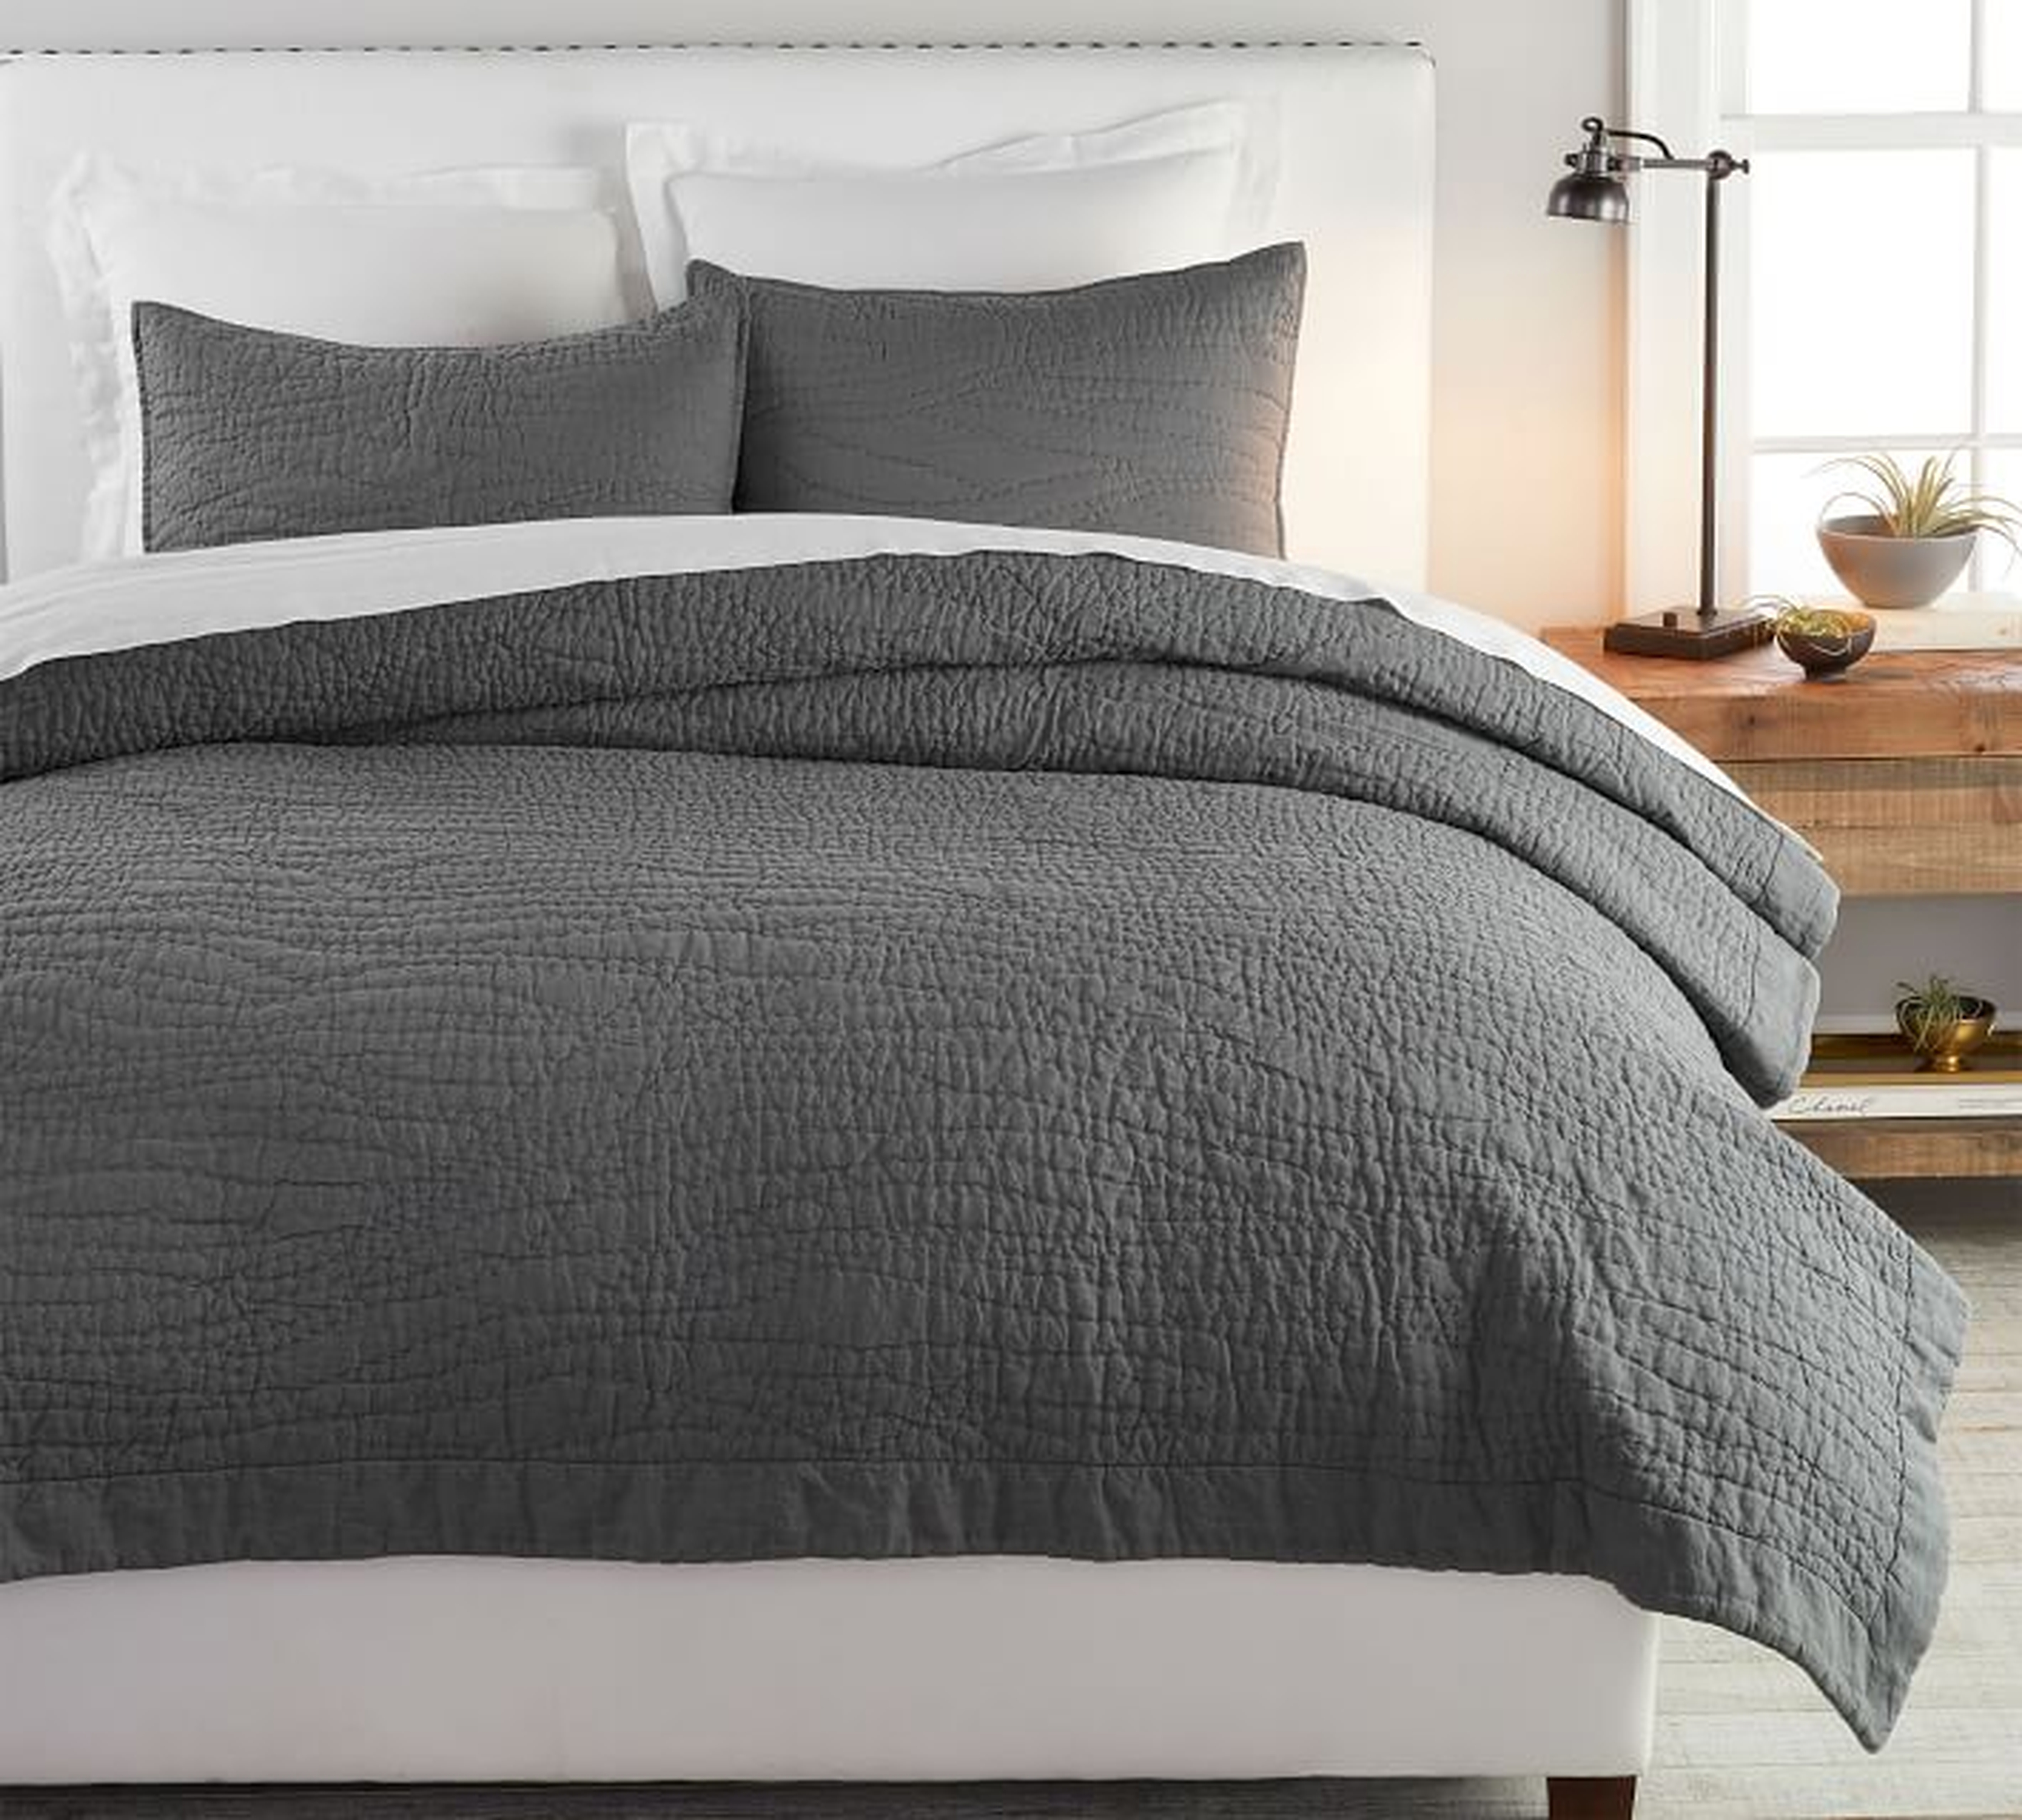 Belgian Flax Linen Handcrafted Quilt, King/Cal King - Pottery Barn